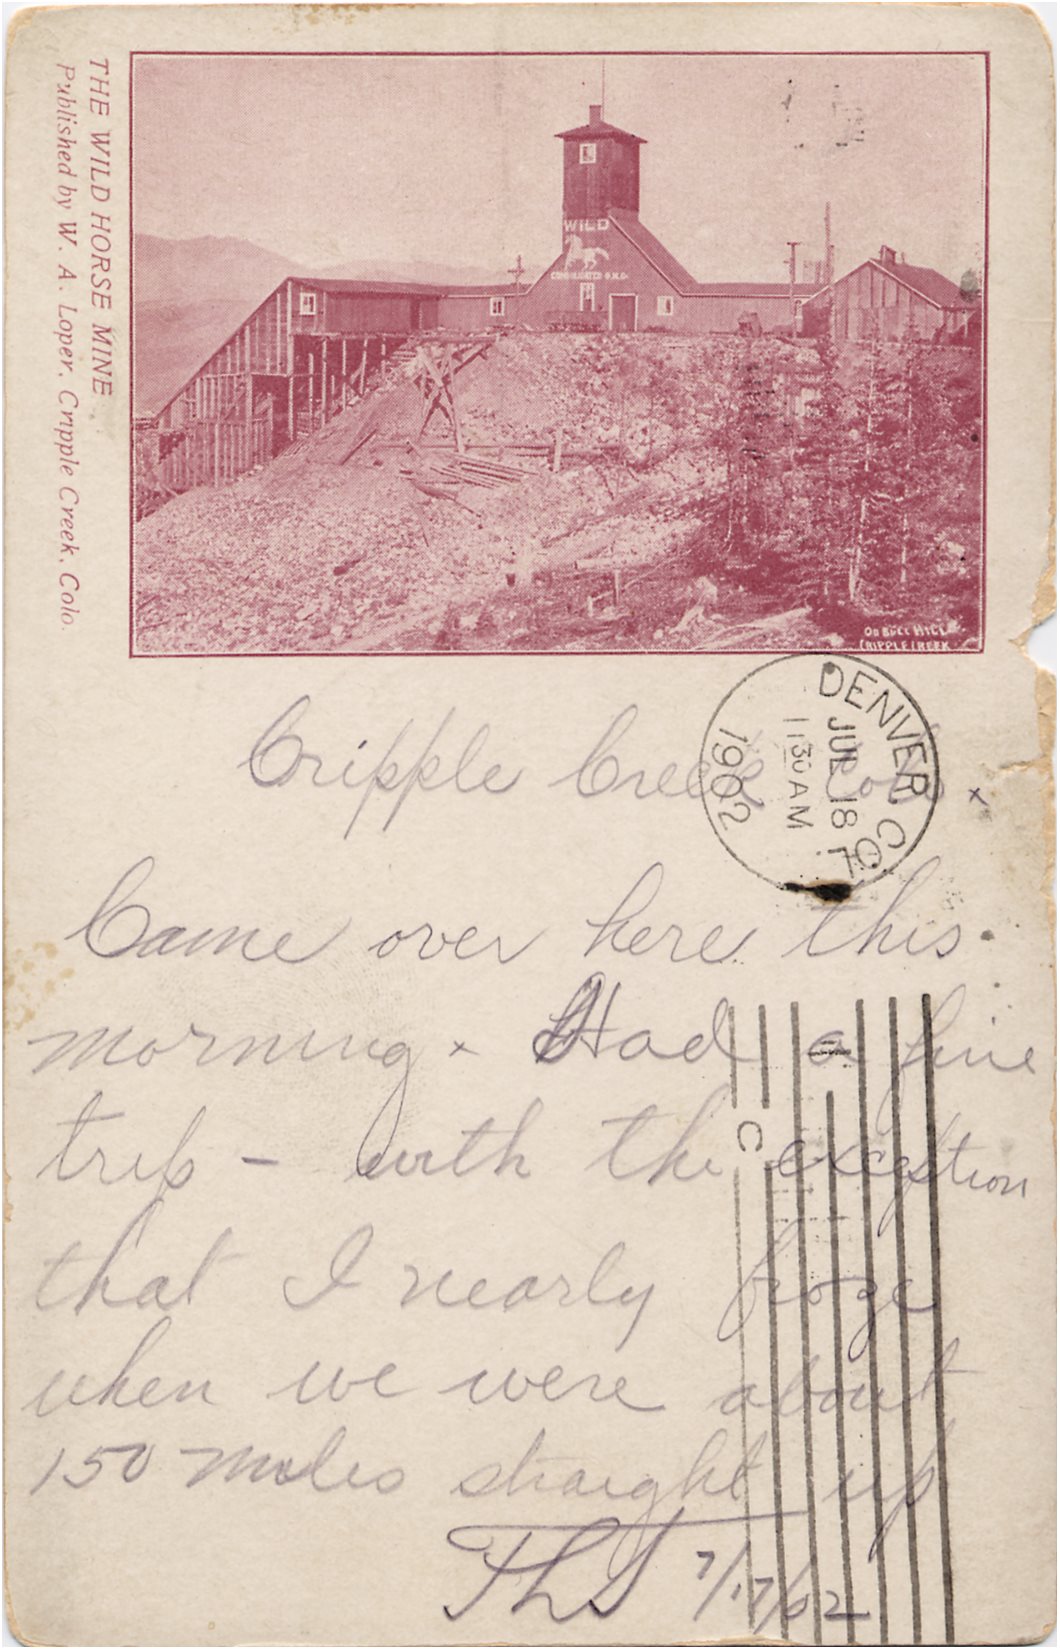 This 'Private Mailing Card' type of Postcard, published by W. A. Loper in Cripple Creek is not the best start point but it is for now the best full view I have of this scene on Bull Hill. Due to the source being a print-type of postcard, and being less than half sized of a normal postcard, also red-inked, the base quality of the view was limiting what I could get out of it, but this view from west side of the Wild Horse Shaft House is still, as said, a great one as it is a rare view, and one I hope to find as a photograph in good quality one day! I have a cropped edition of this view in another printed source also.
   Regarding the scene, there are three ore-cars at a dump that is growing and a fourth is standing alone further to the right. The Shaft House has a Horse painted on it together with the name 'Wild' above the horse drawing and 'Consolidated G. M. Co.' below the horse drawing – quite cool! The whole structure is a long narrow one, with the Electric Hoist House at the right-hand side and the Ore House at the left-hand side.
   Being this postcard is stamped July 17, 1902, the base pic must be from not later than early July 1902 as it takes time to prepare a postcard print batch with engraving an all. But it is to me impossible to date it further, all I can say is this scene fits the look drawn on a 1900 Sanborn Fire Insurance map, making it possible also to be a late 1899 or 1900 photograph.